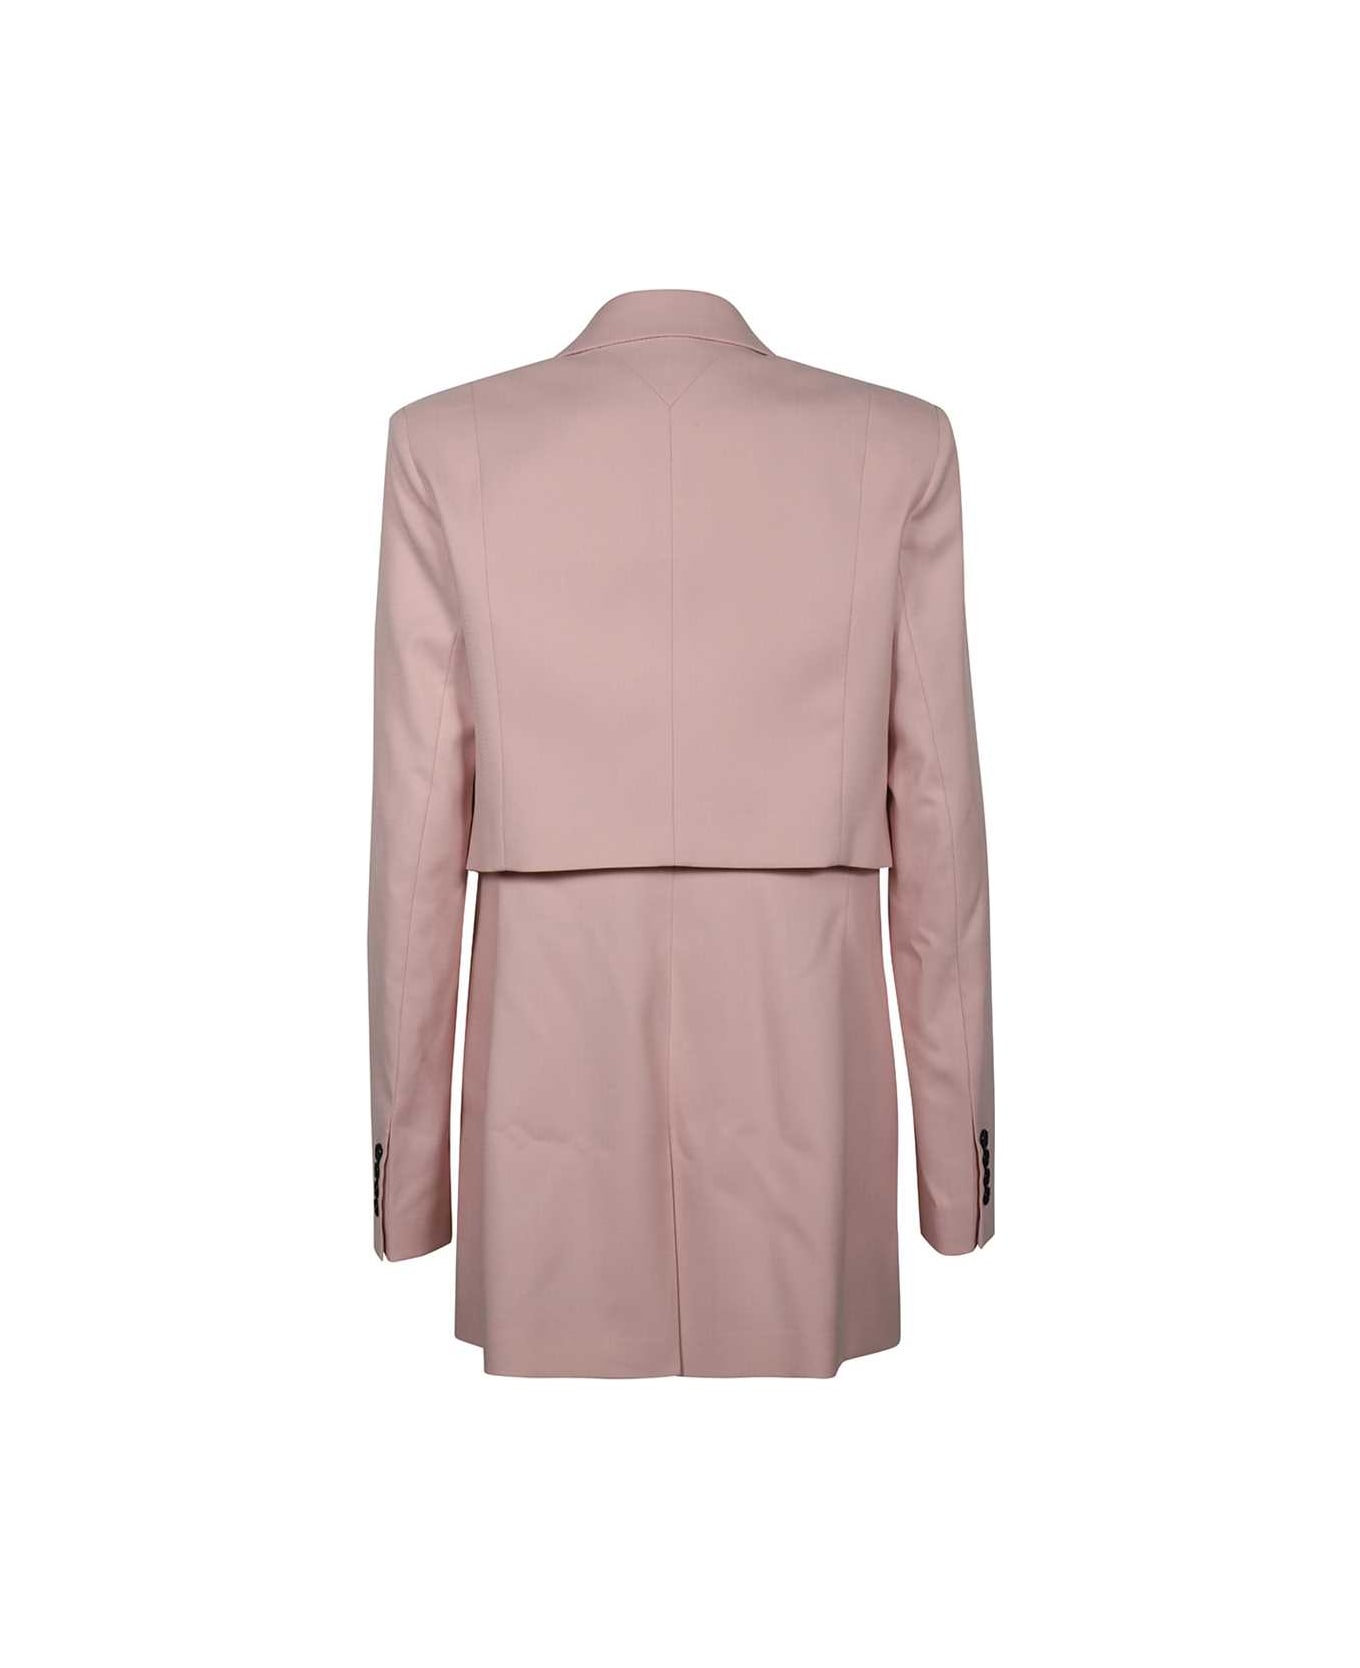 Karl Lagerfeld Double Breasted Blazer - Pink コート